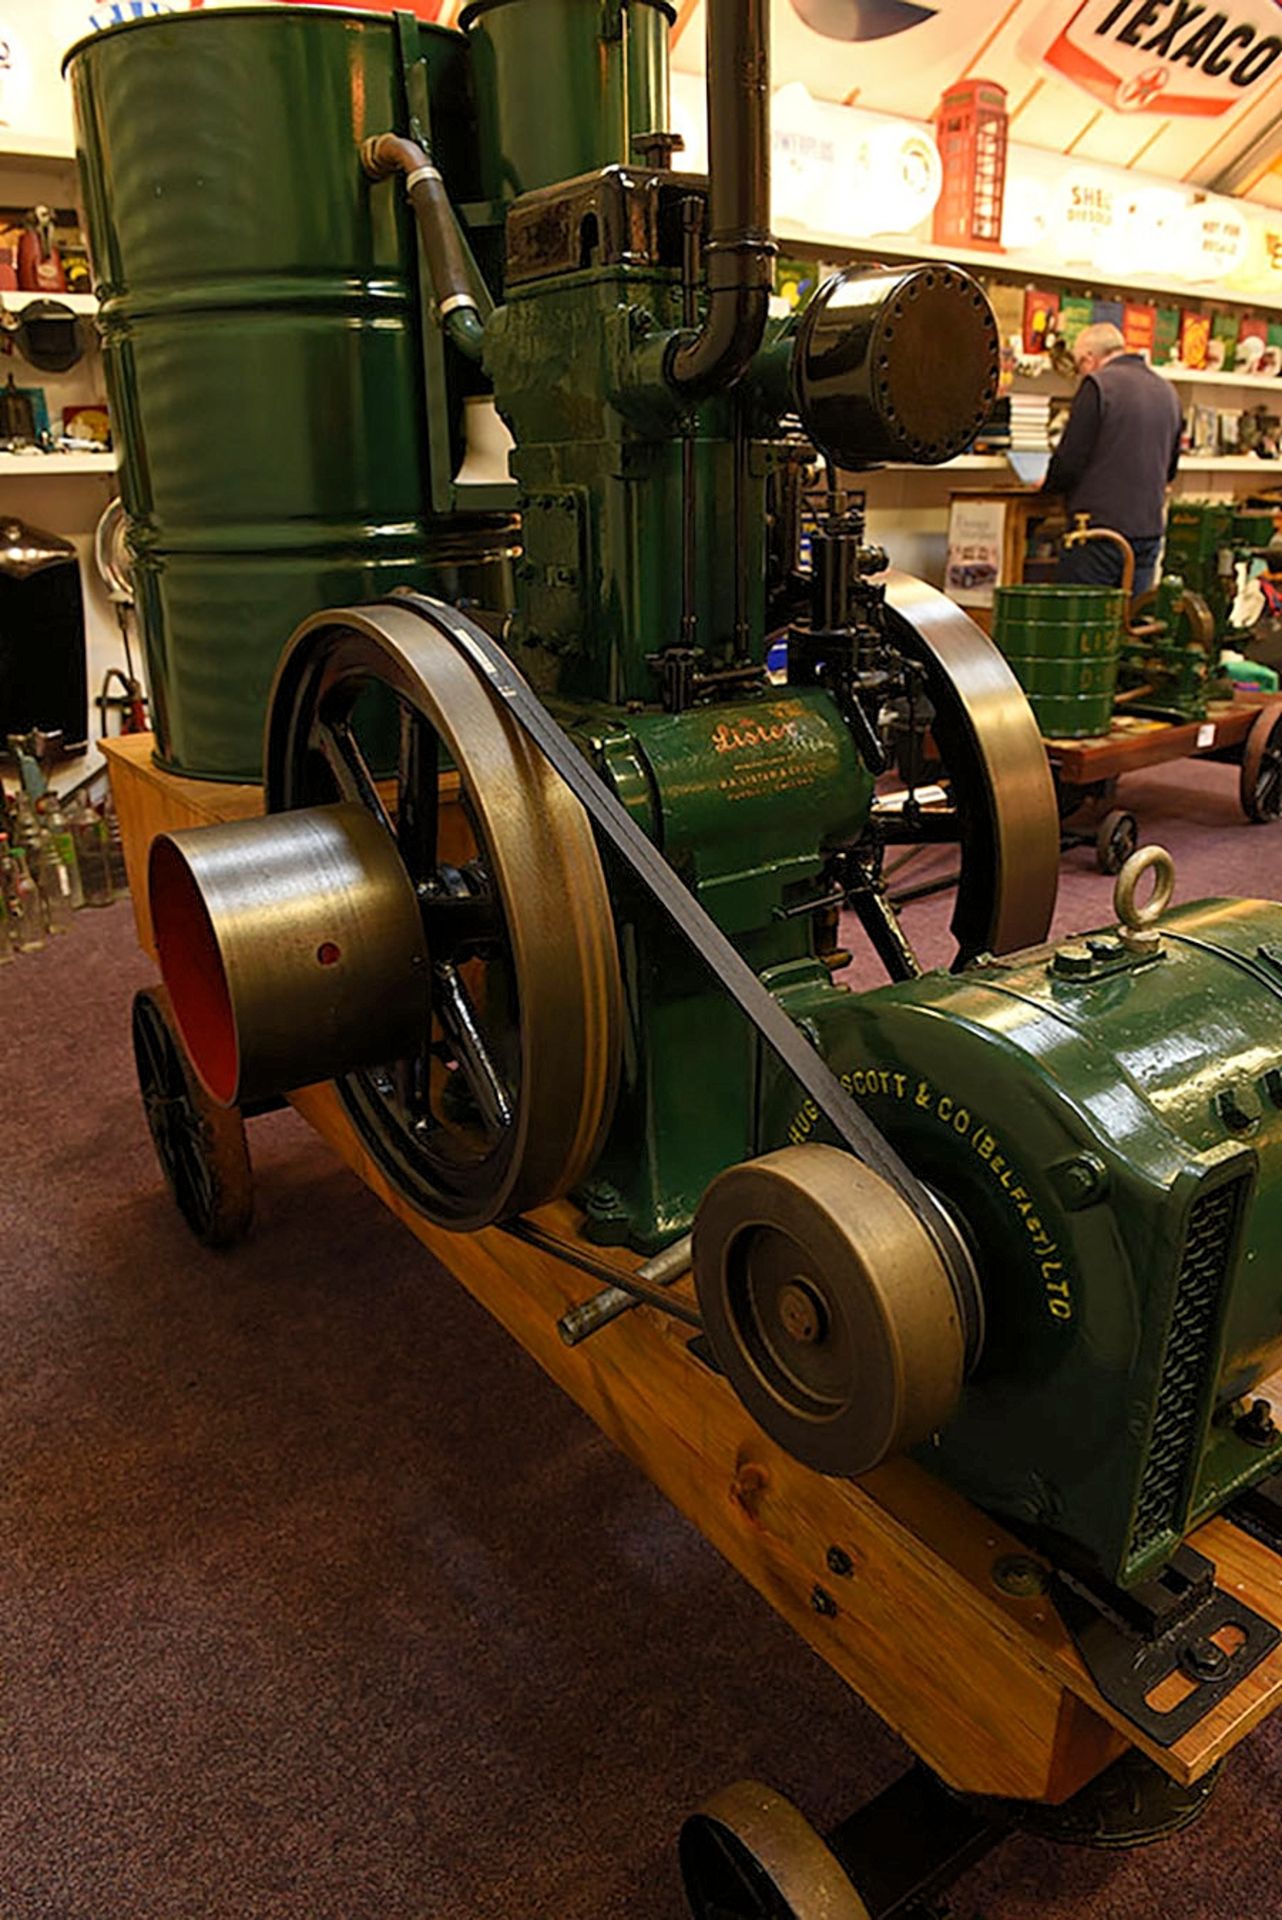 1940 Lister 5 HP water cooled diesel engined generator set ( fuel tank needs repaired ) - Image 9 of 10